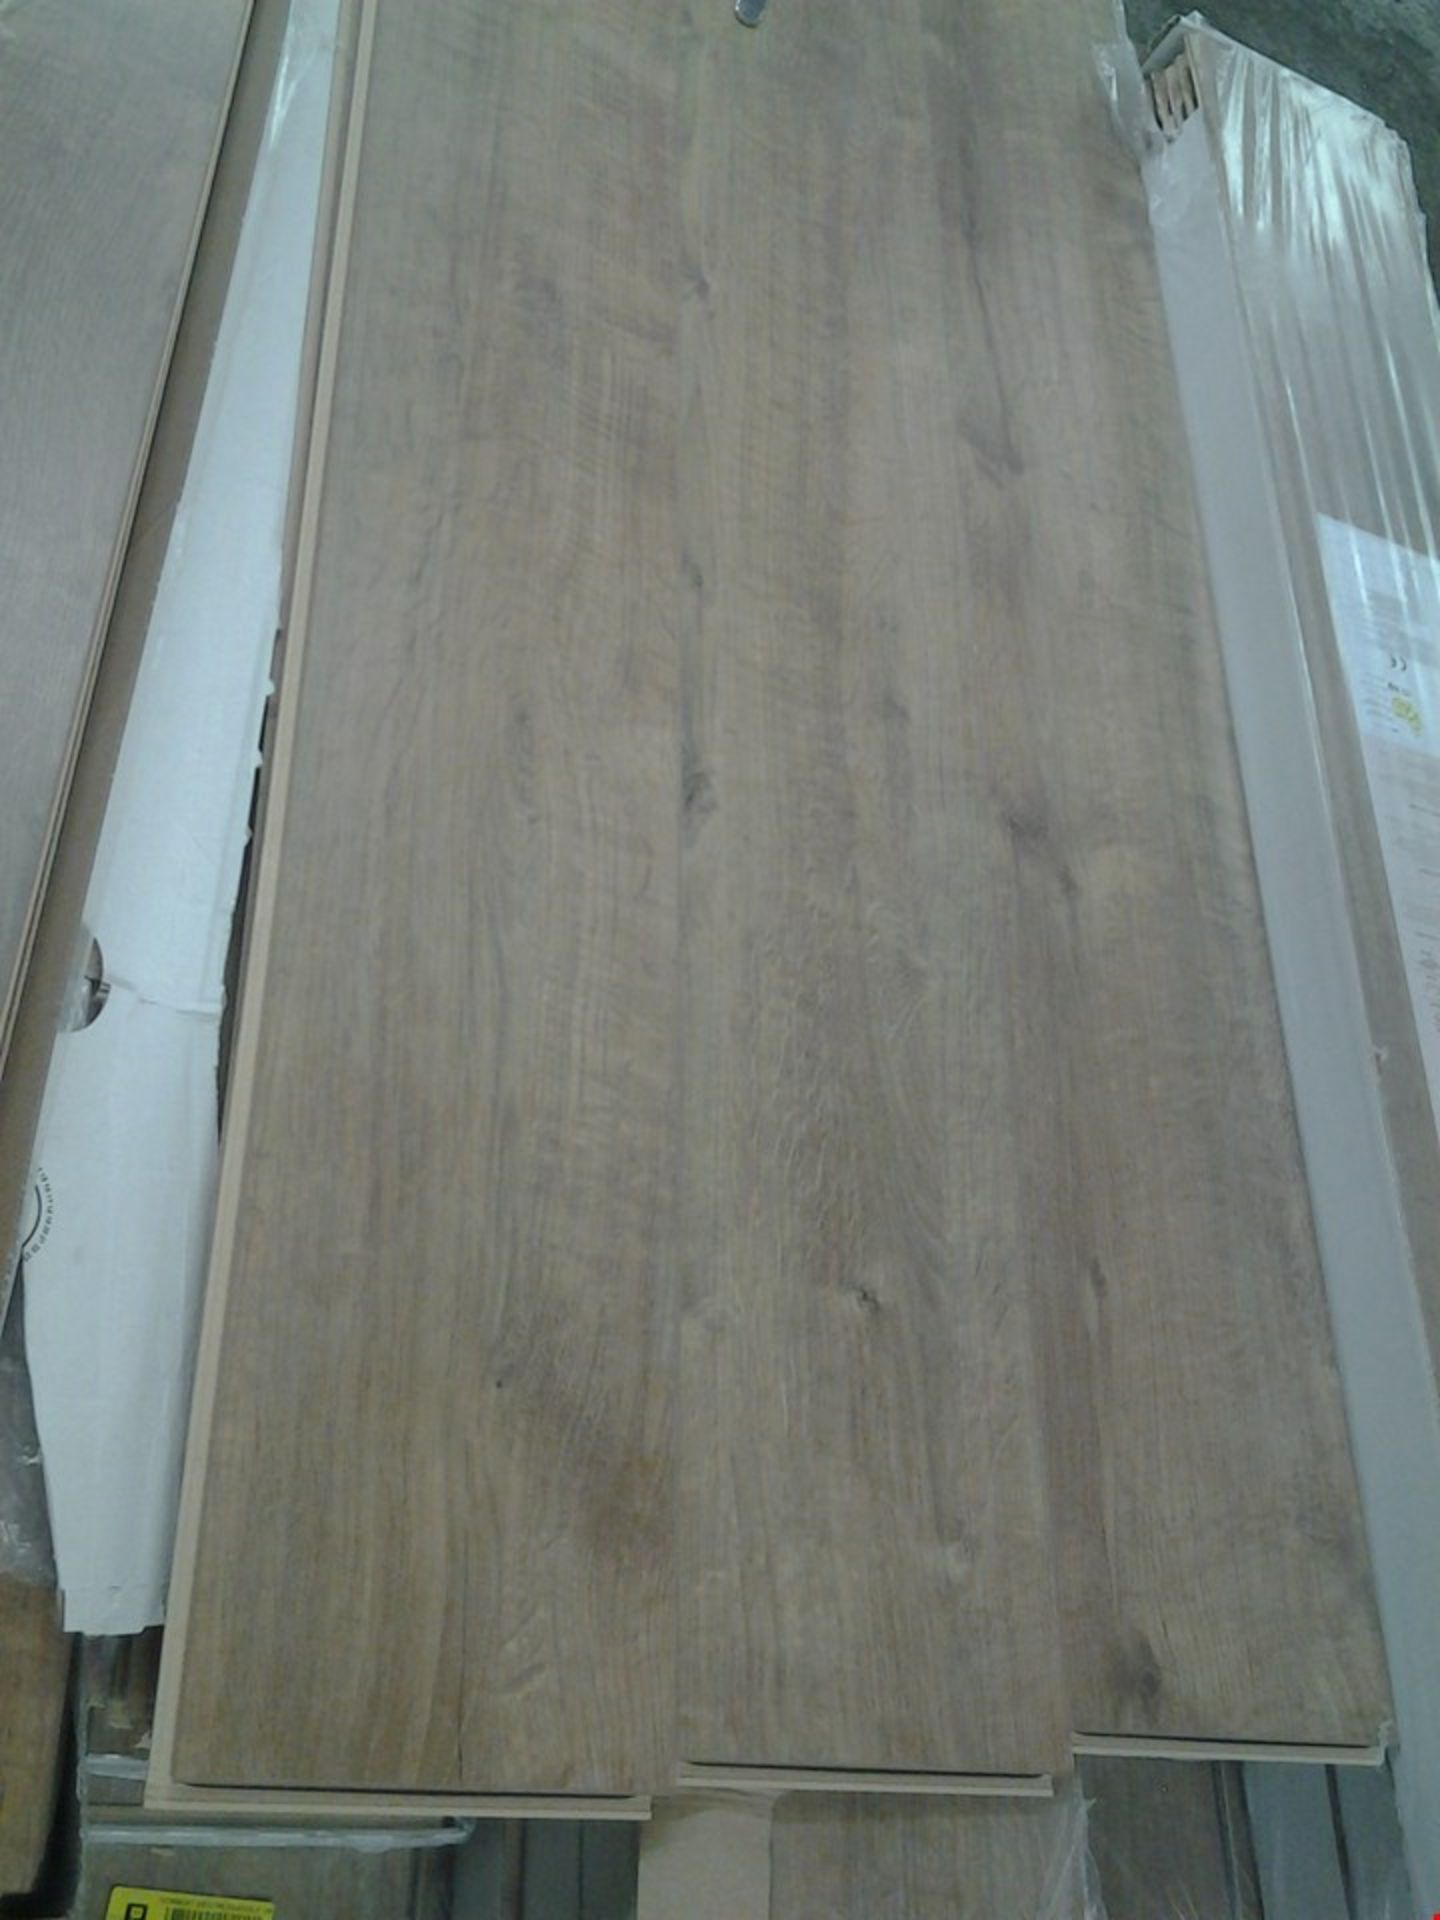 8 PACKS OF CONCERTINO KOLBERG OAK EFFECT LAMINATE FLOORING- EACH PACK CONTAINS APPROXIMATELY 1....